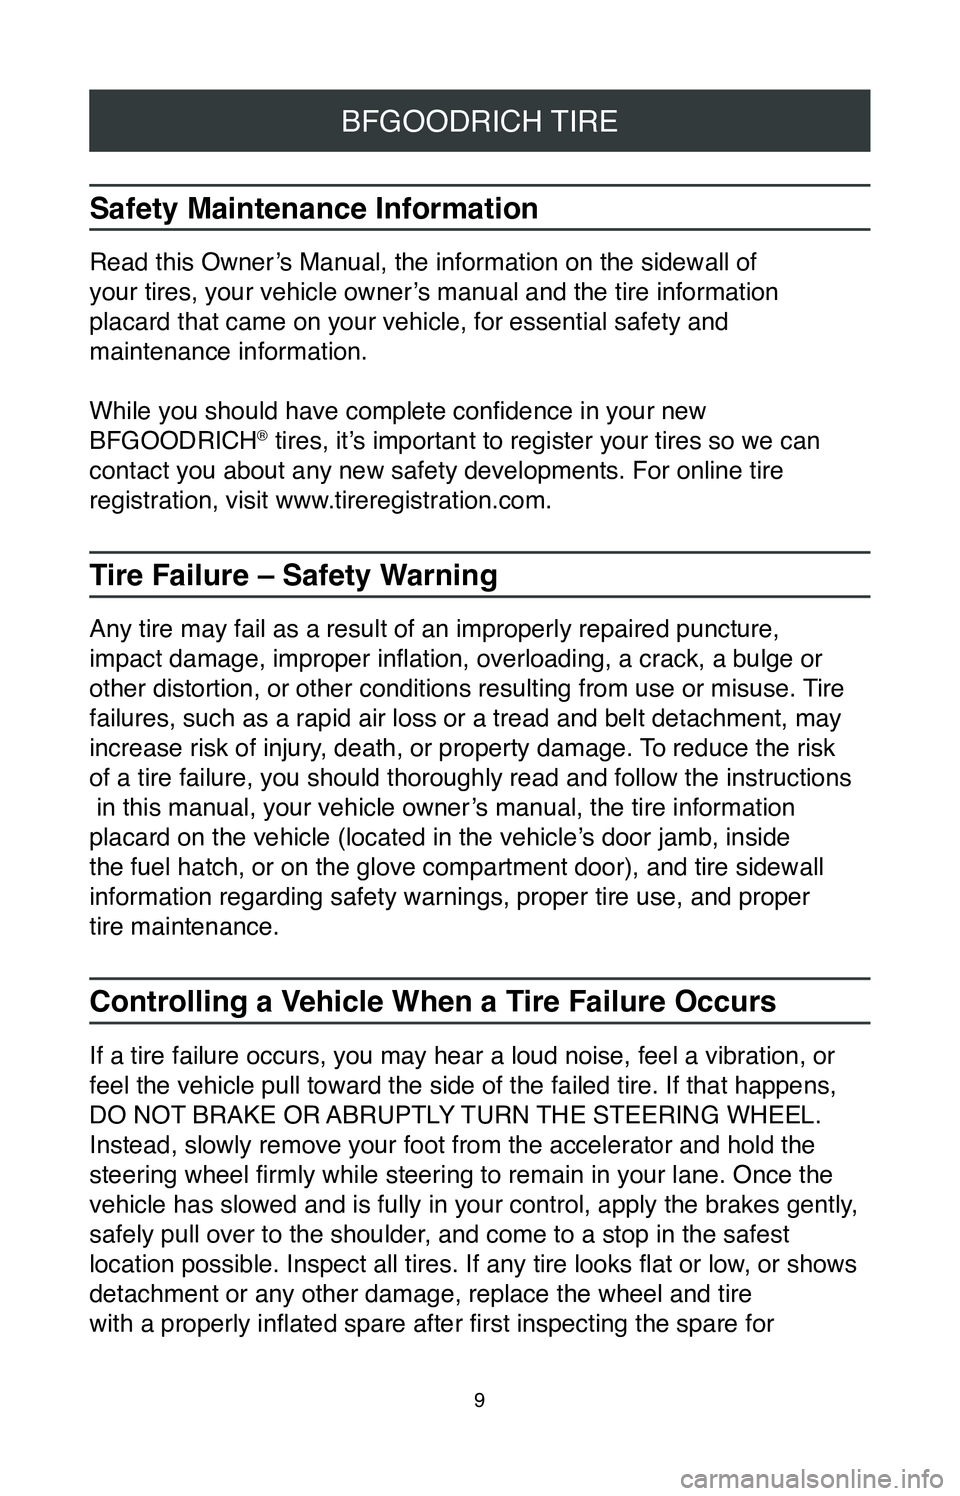 TOYOTA PRIUS 2020  Warranties & Maintenance Guides (in English) 9
BFGOODRICH TIRE
Safety Maintenance Information
Read this Owner’s Manual, the information on the sidewall of  
your tires, your vehicle owner’s manual and the tire information   
placard that cam